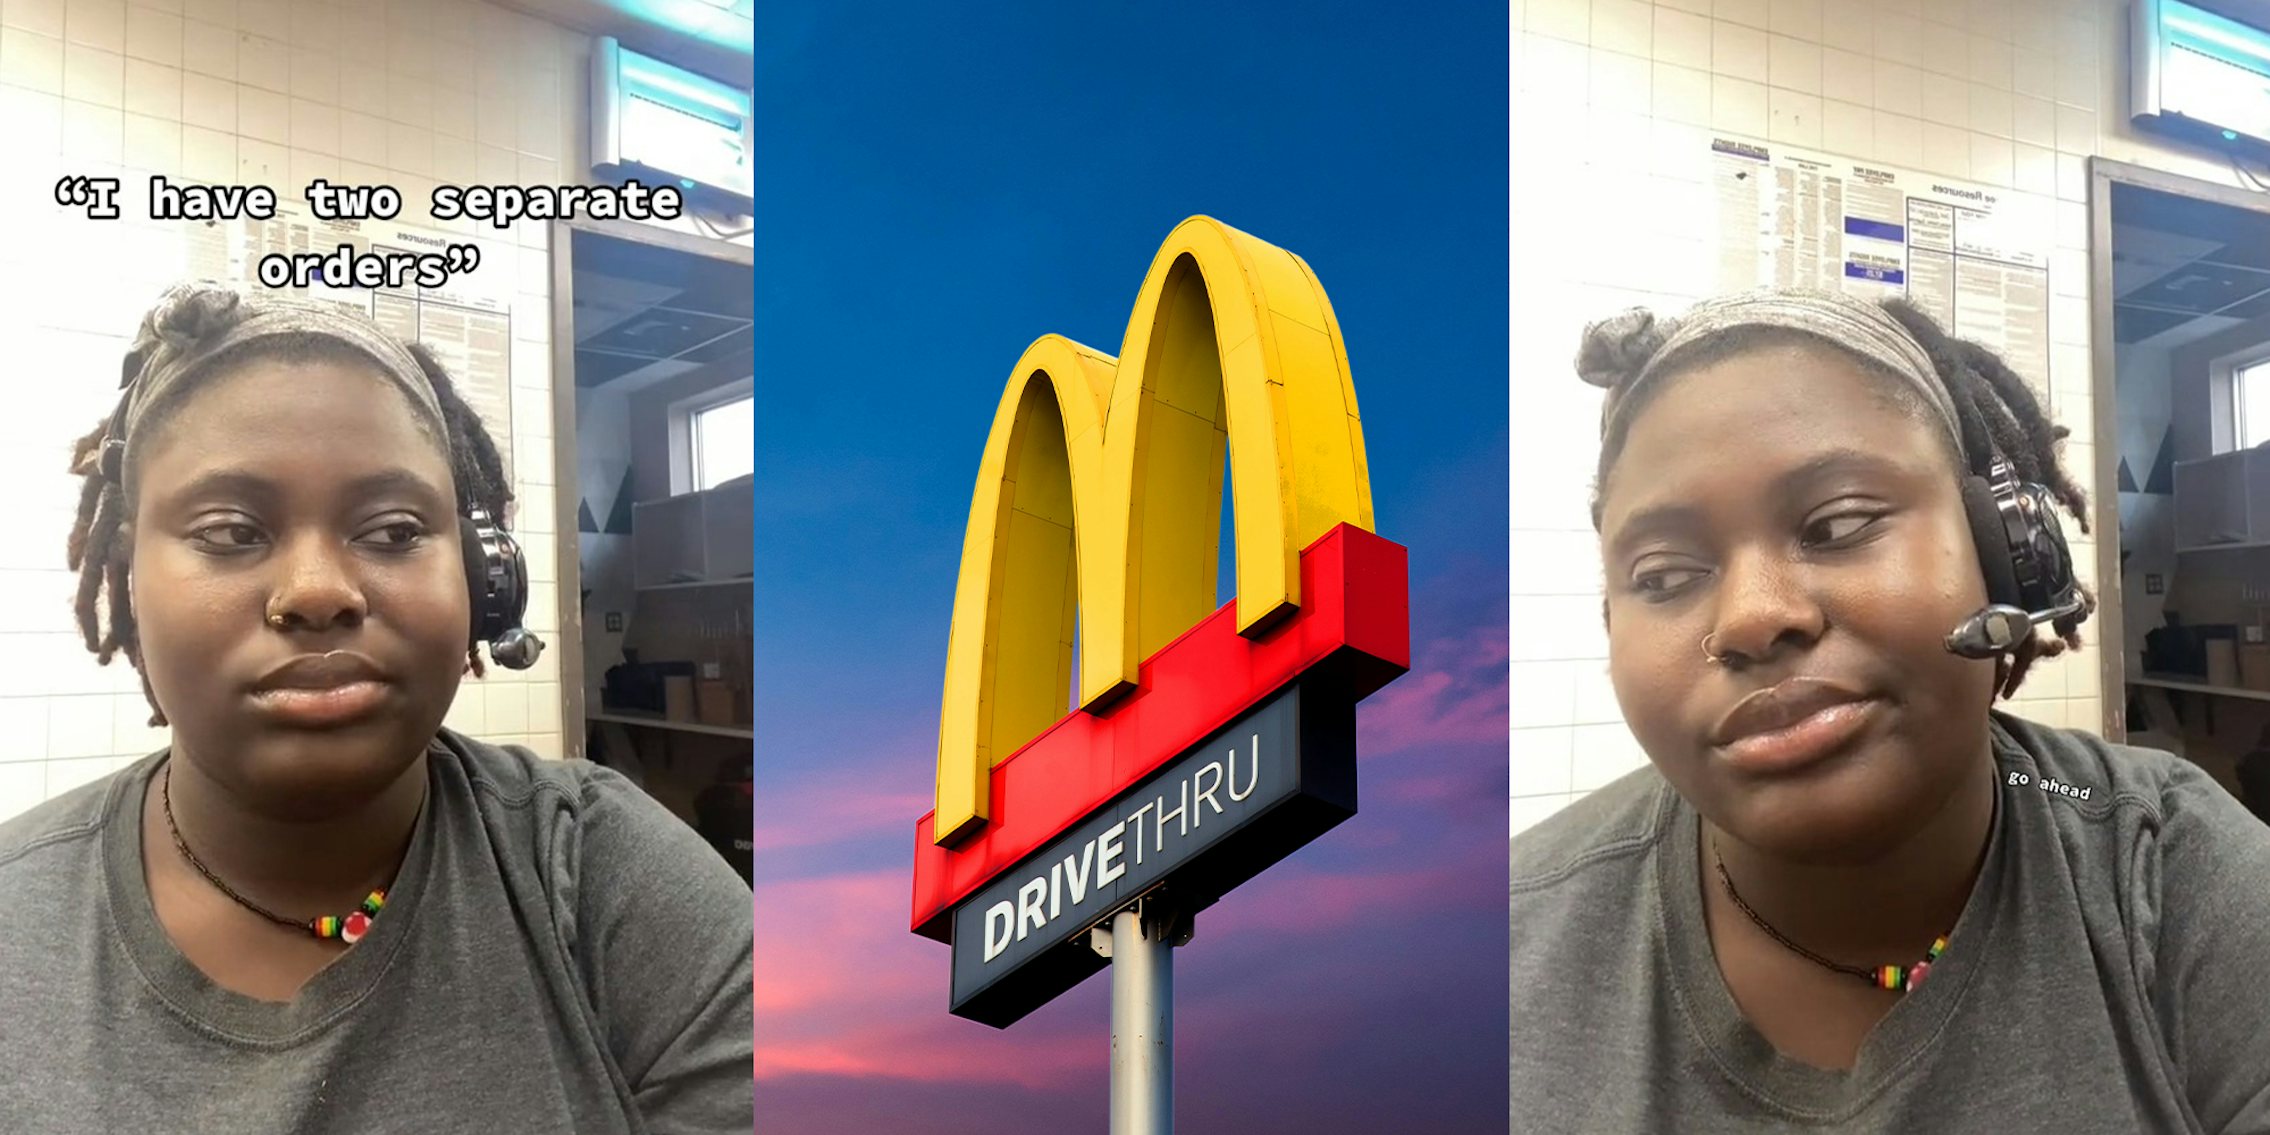 McDonald's worker complains about customers who ask for separate orders at drive-thru